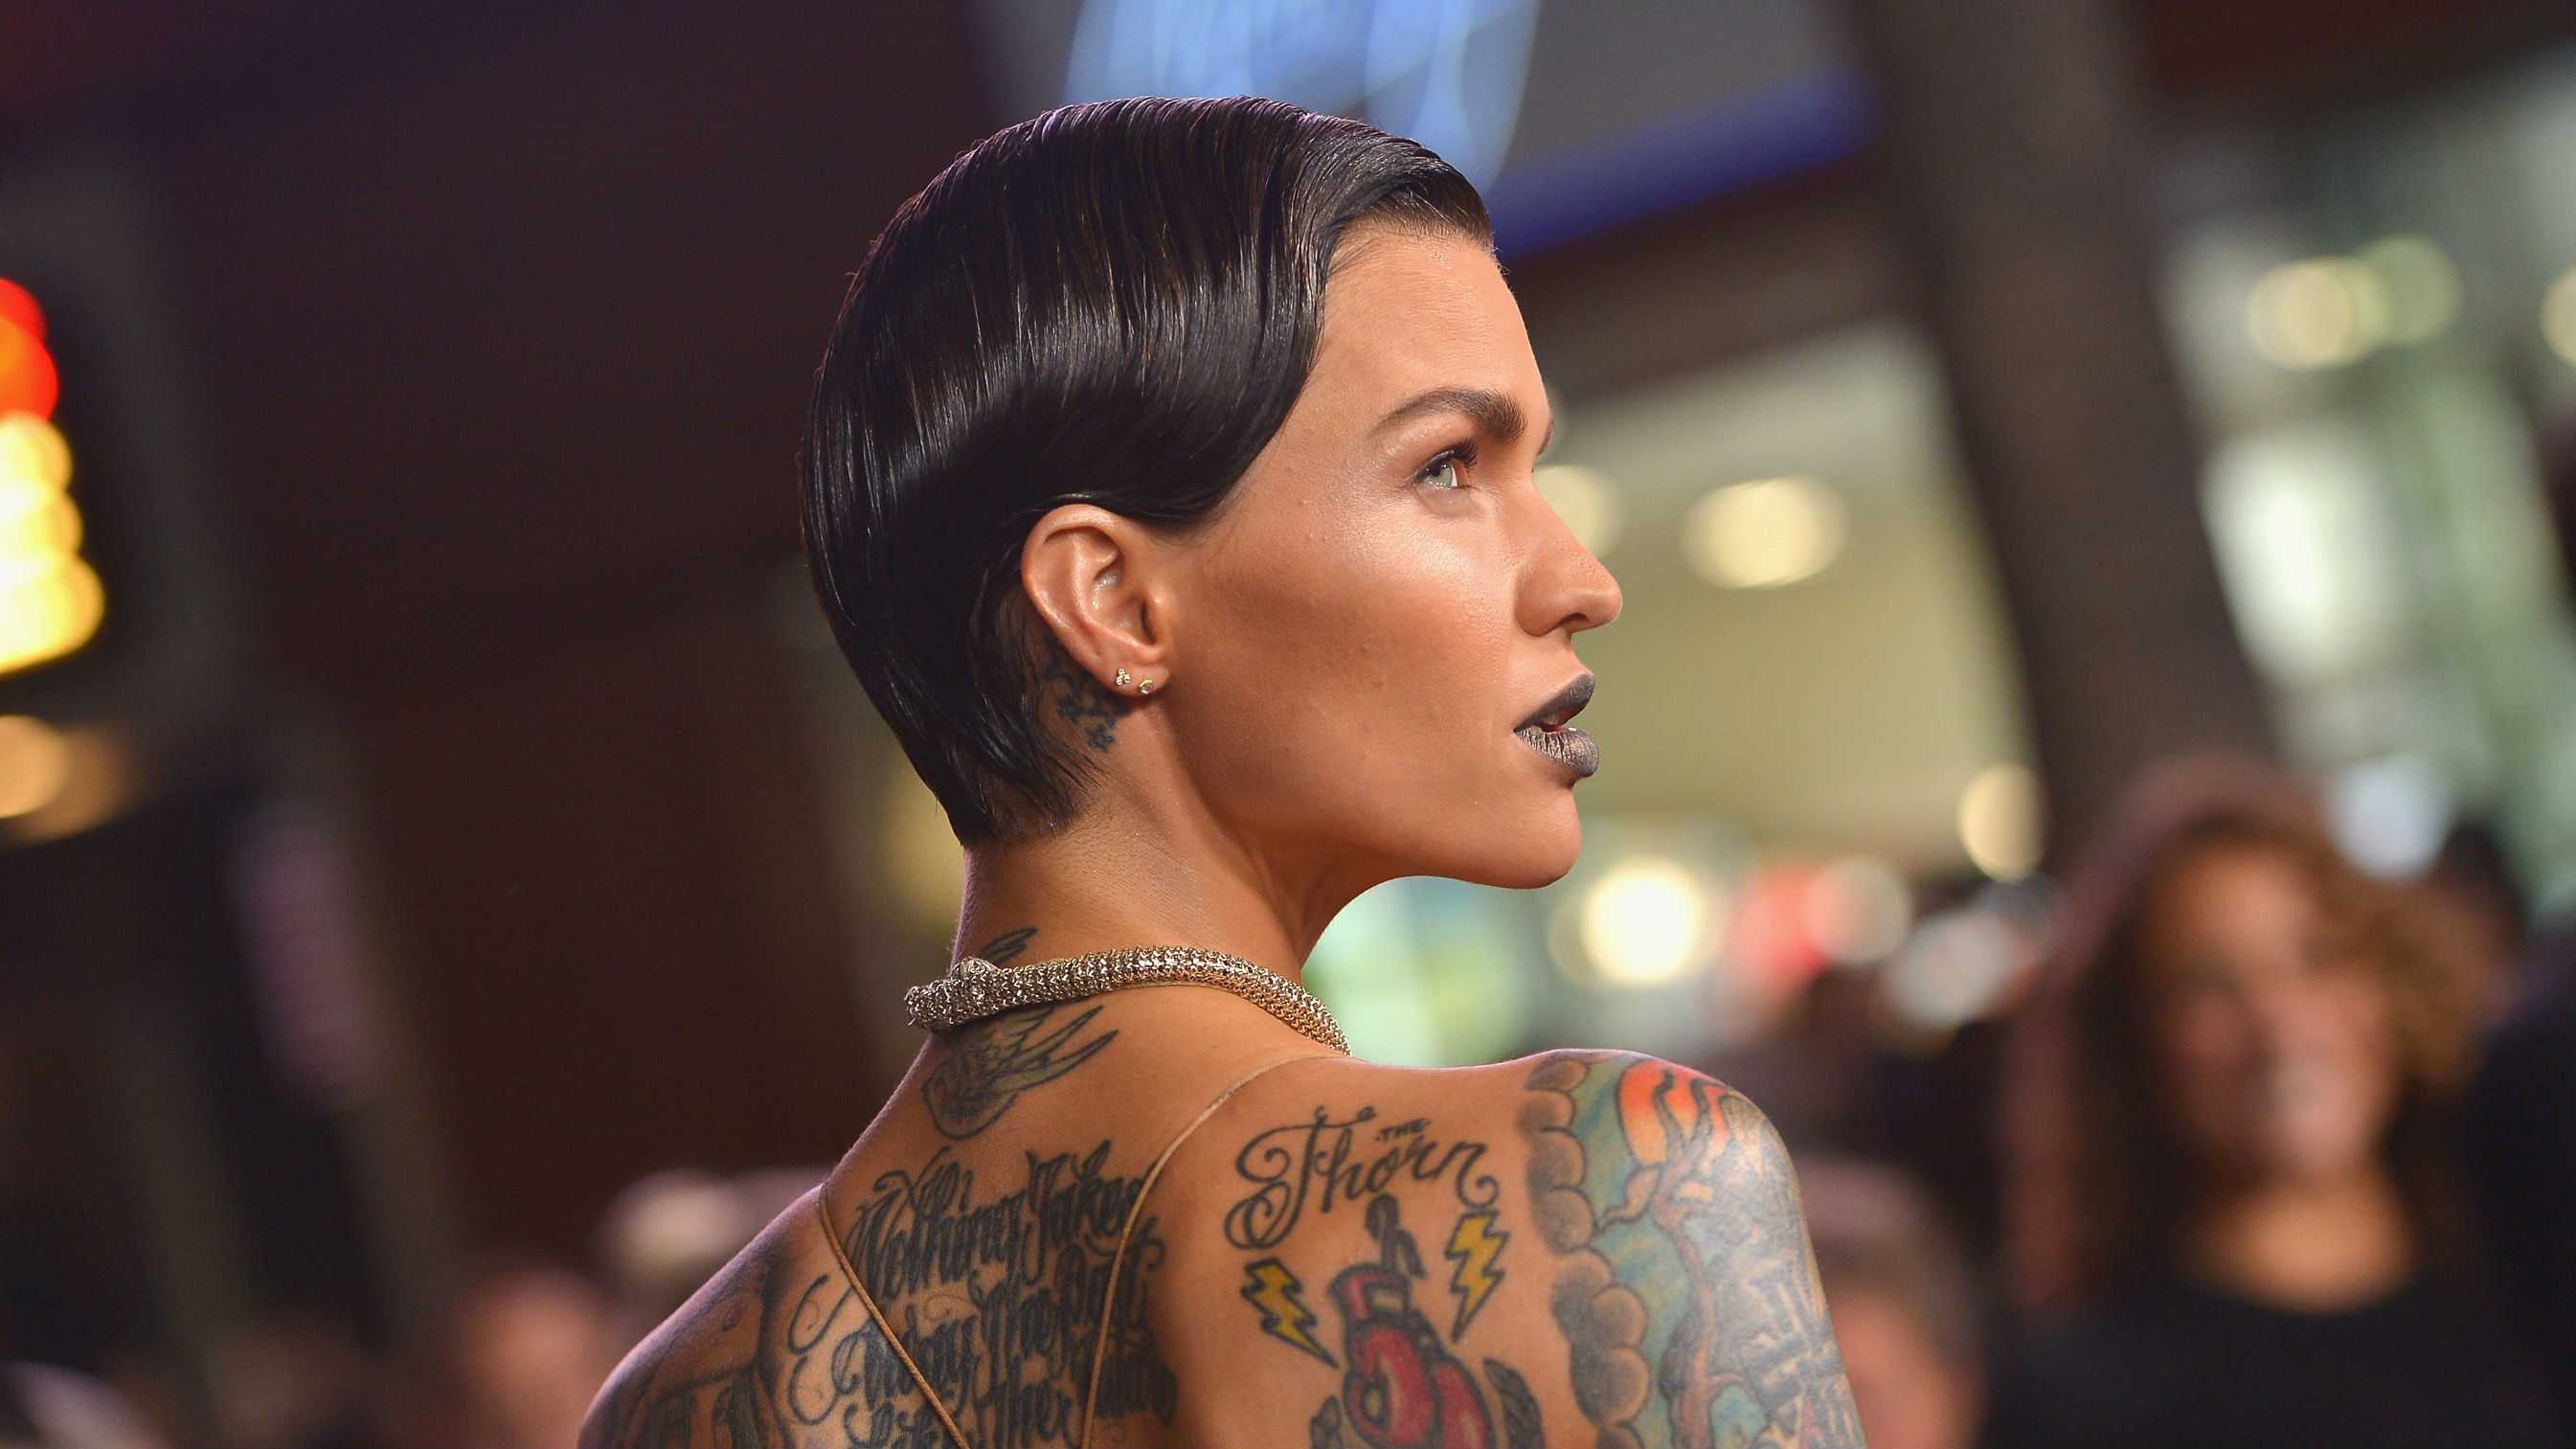 70+ Hot Pictures Of Ruby Rose – Batgirl In Arrowverse And Orange Is The New Black Star. 16